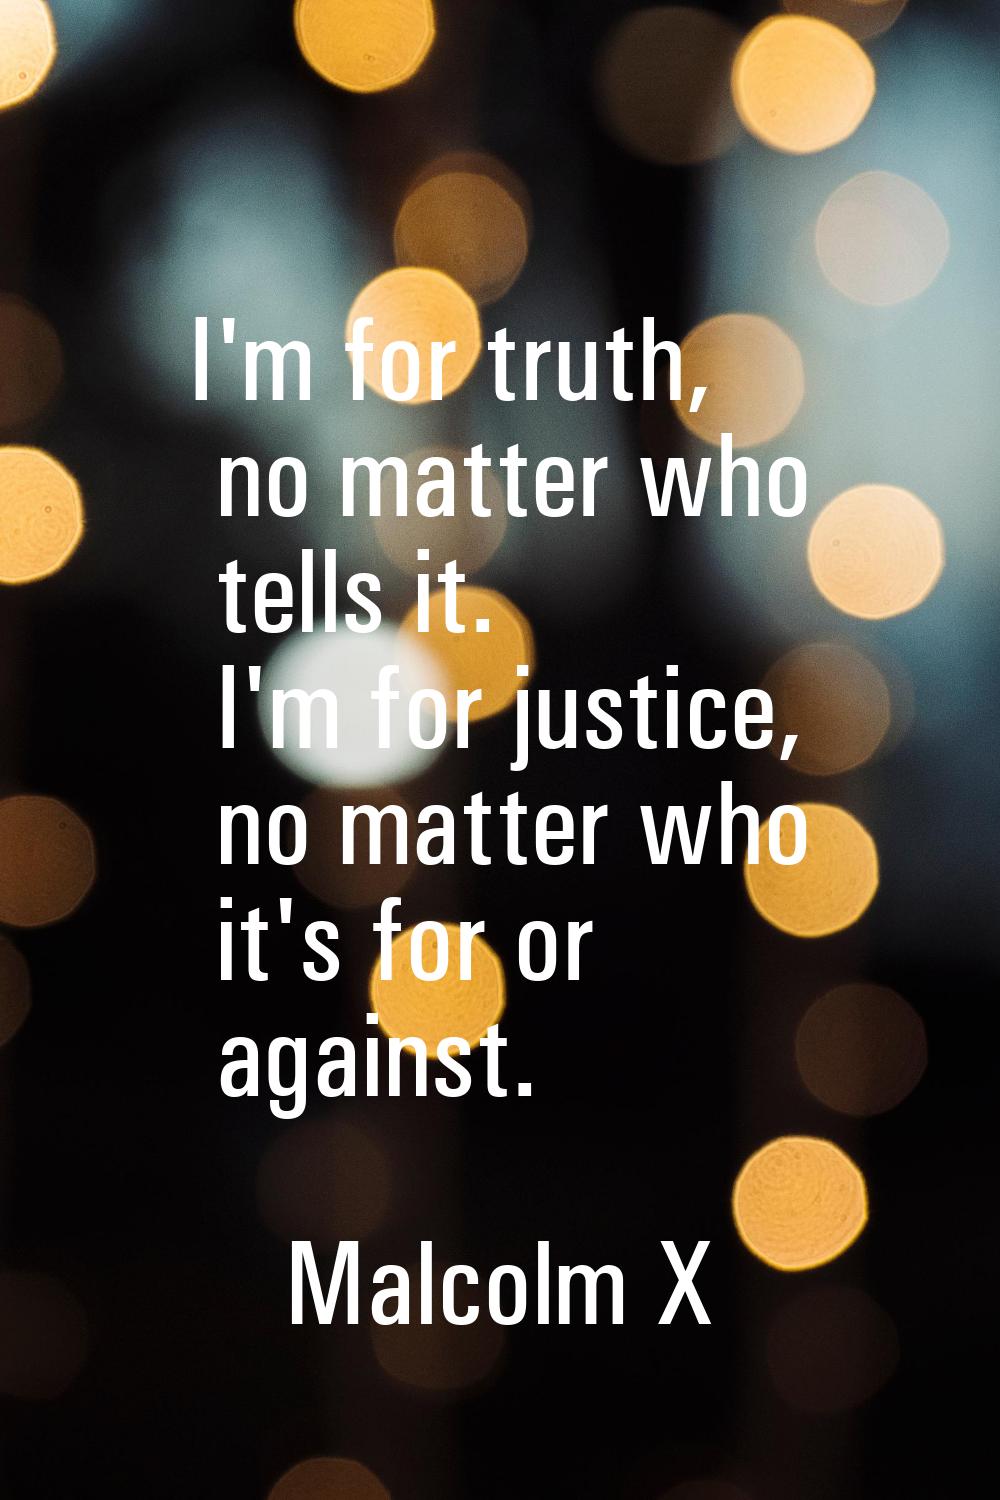 I'm for truth, no matter who tells it. I'm for justice, no matter who it's for or against.